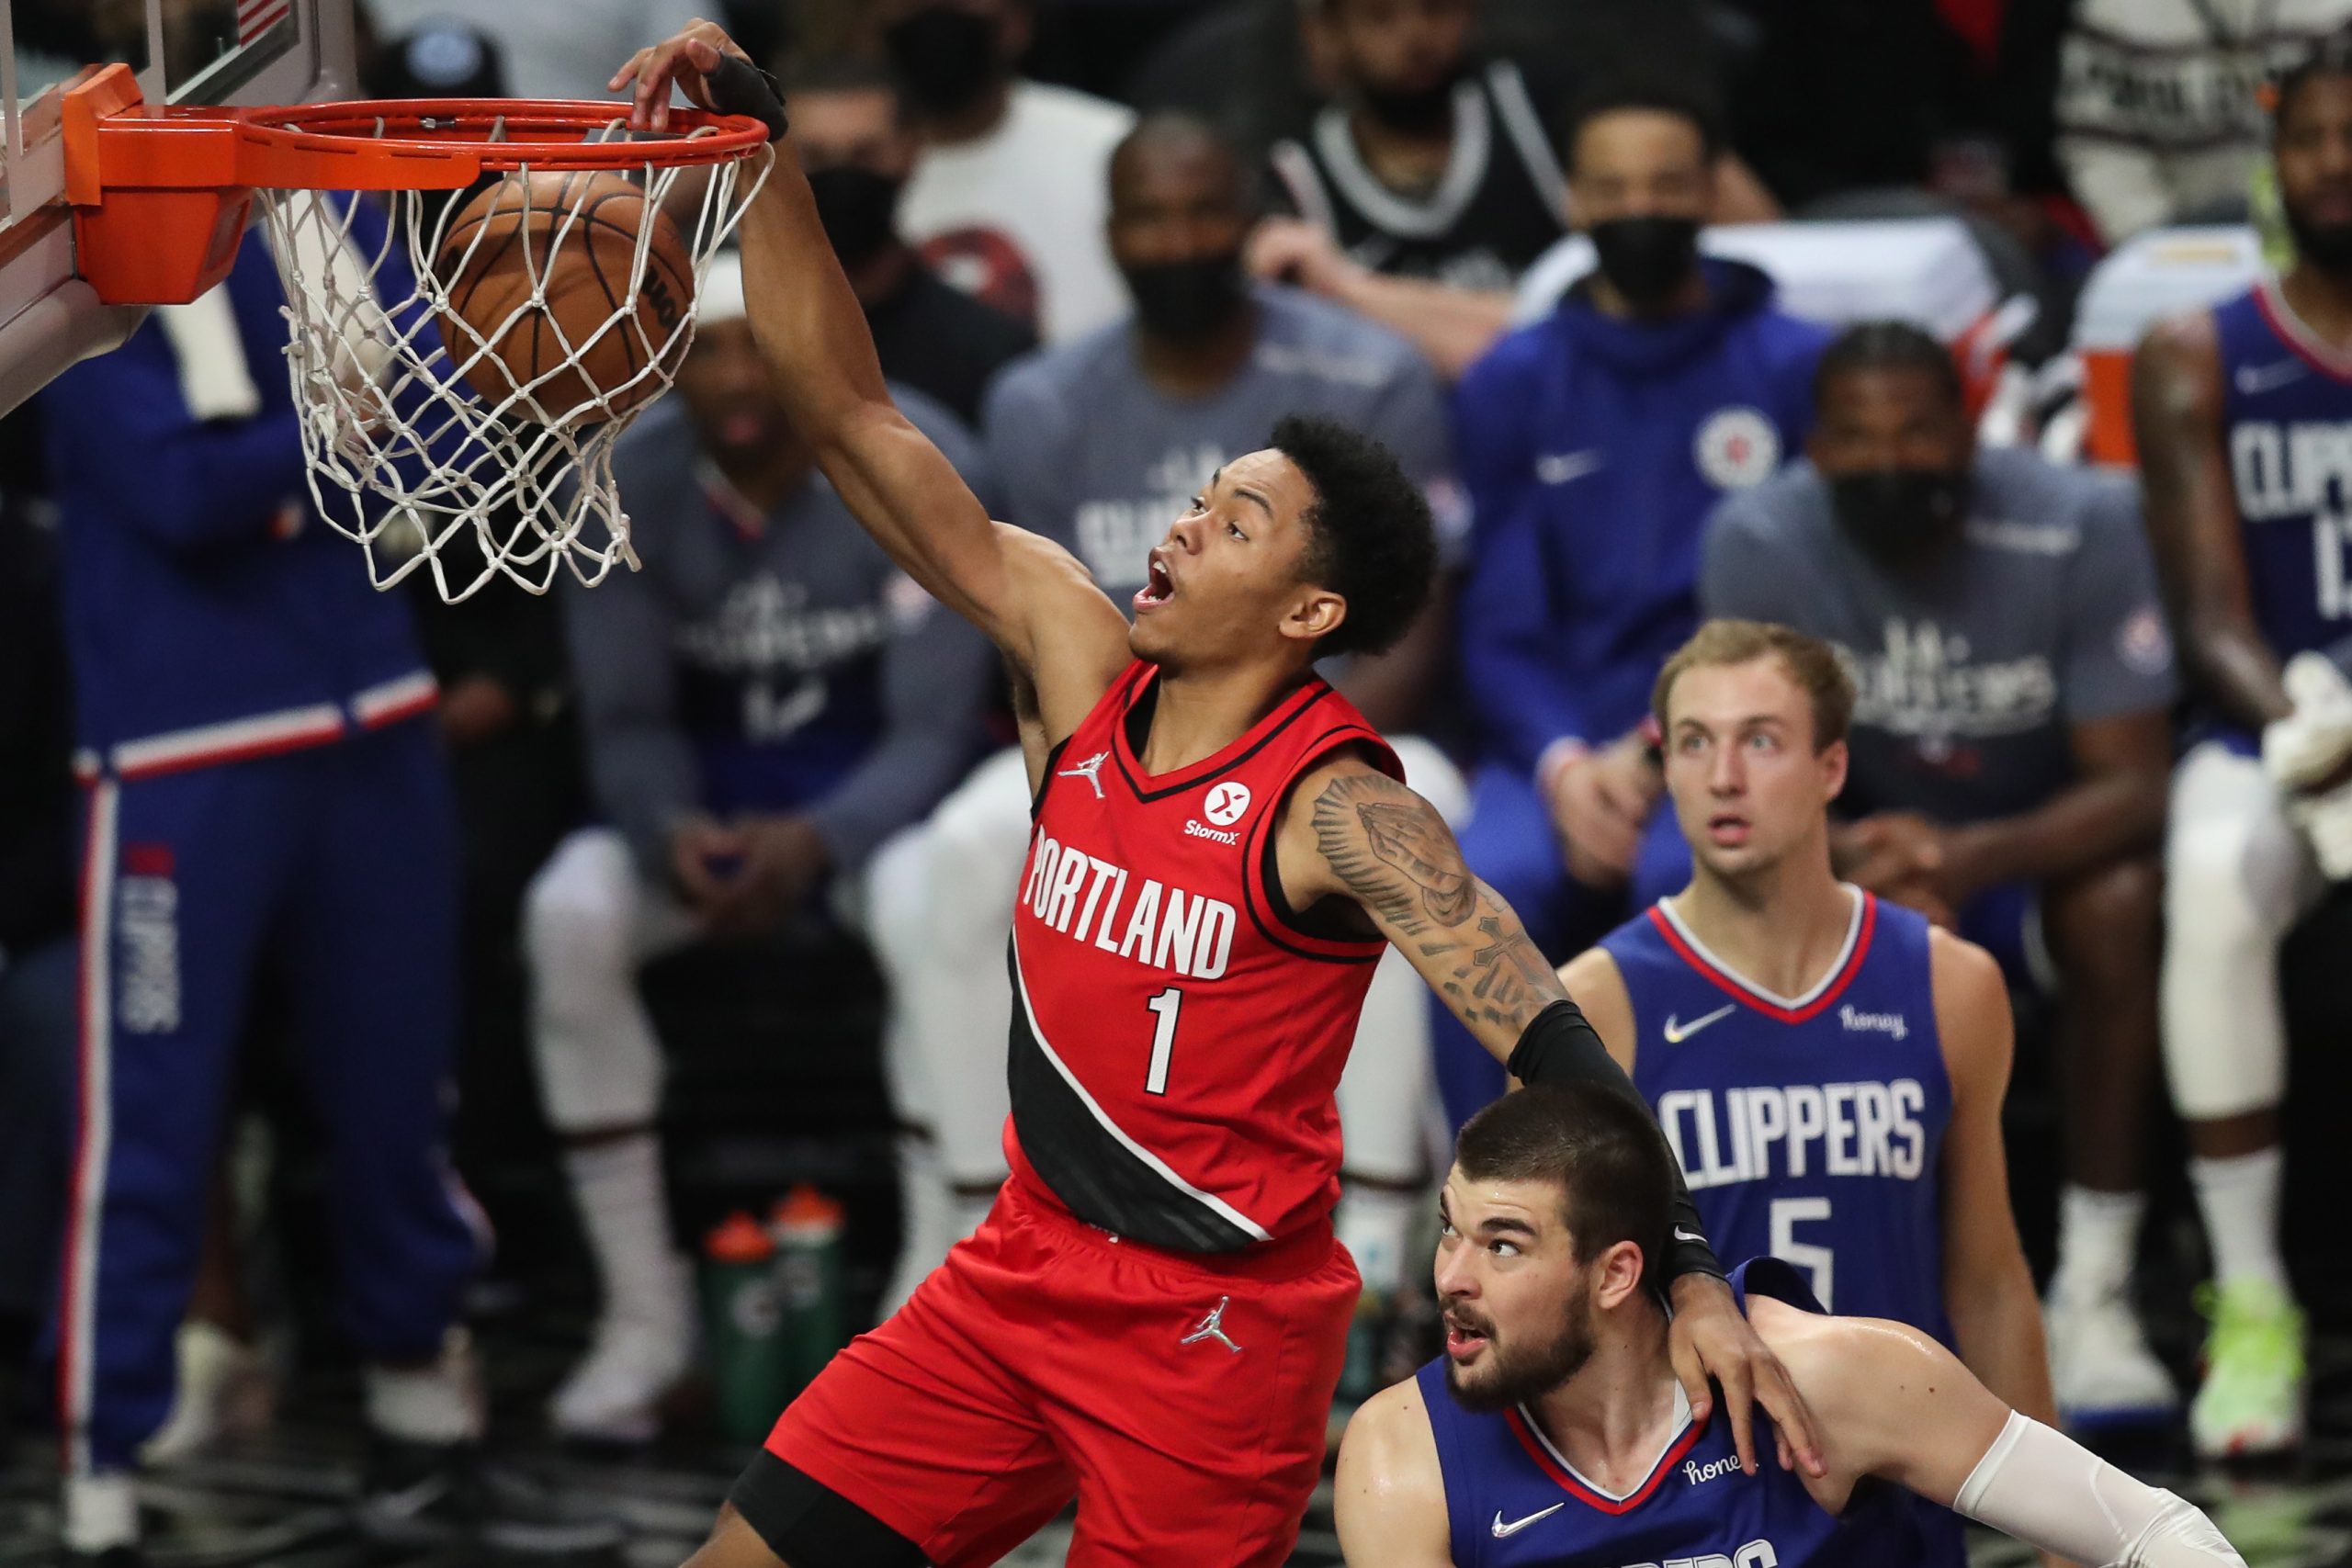 epa09573398 Portland Trail Blazers guard Anfernee Simons (L) scores while being guarded by Los Angeles Clippers center Ivica Zubac (R) during the third quarter of the NBA basketball game between the Los Angeles Clippers and Portland Trail Blazers at the Staples Center in Los Angeles, California, USA, 09 November 2021.  EPA/CAROLINE BREHMAN  SHUTTERSTOCK OUT